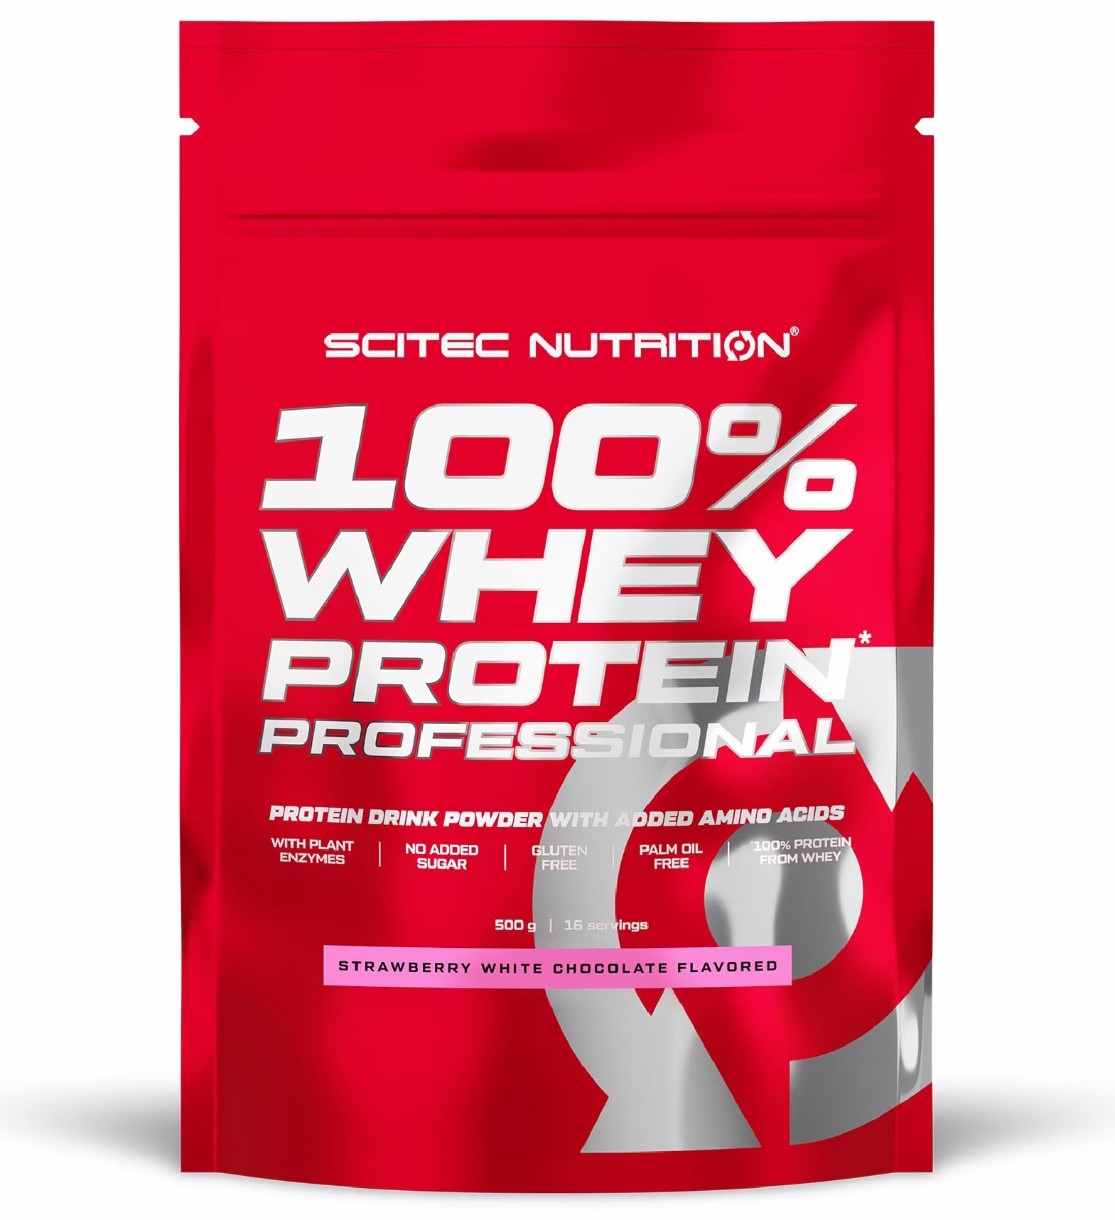 Proteină Scitec-nutrition 100% Whey Protein Professional 500g Strawberry White Chocolate